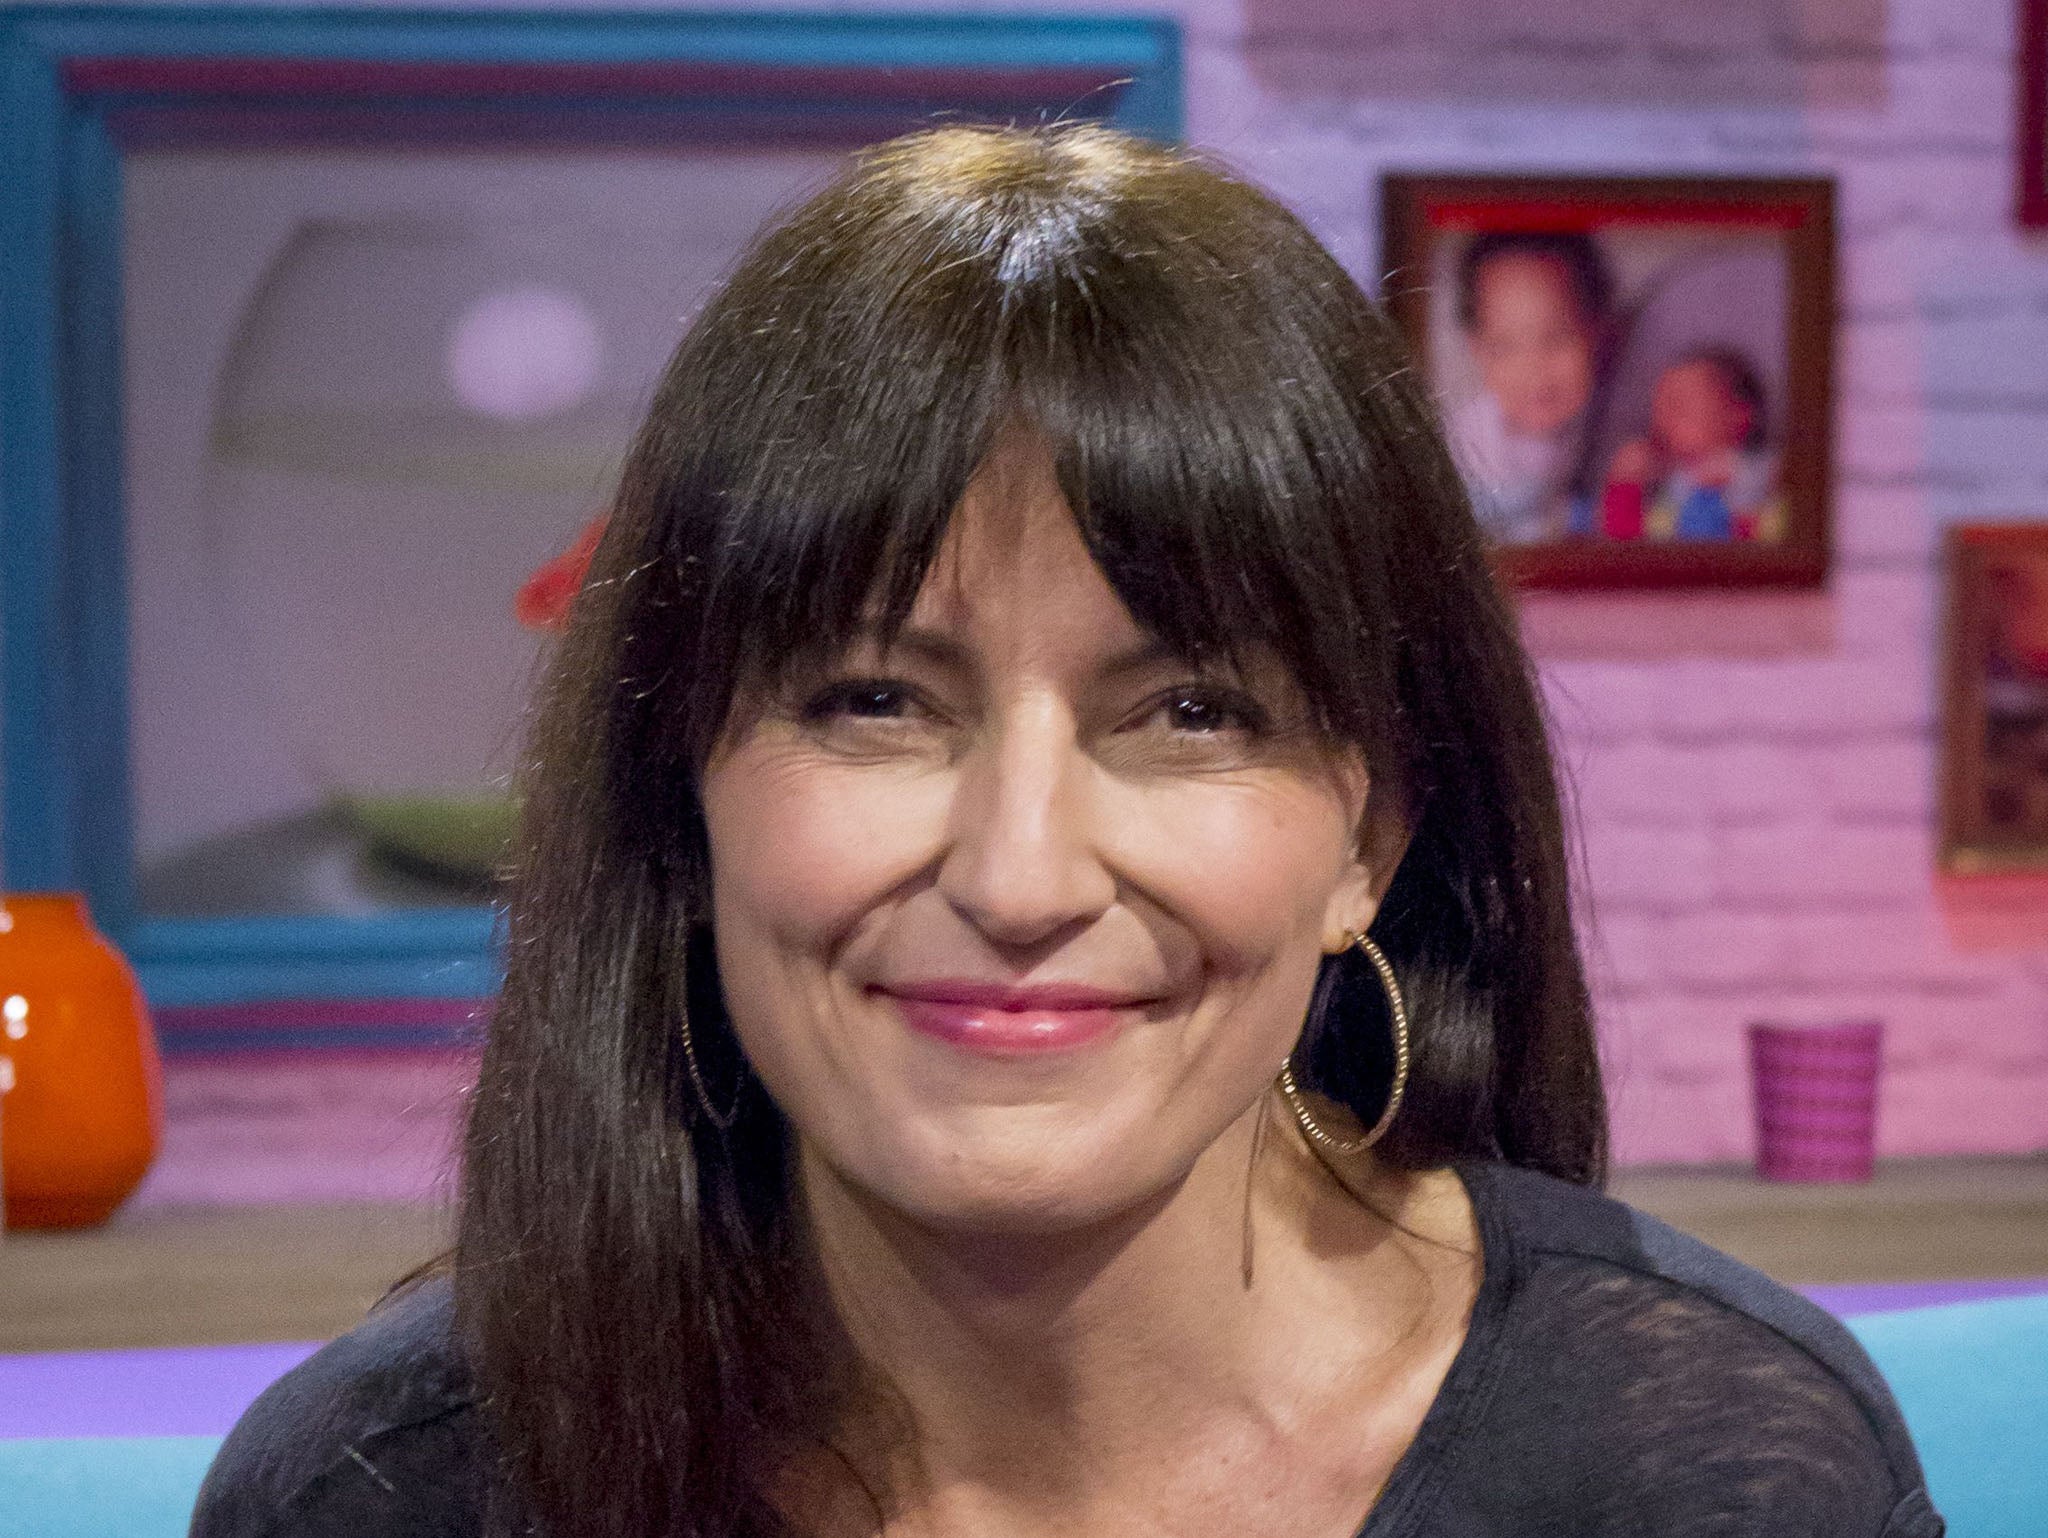 Davina McCall confesses she still attends Narcotics Anonymous meetings ...